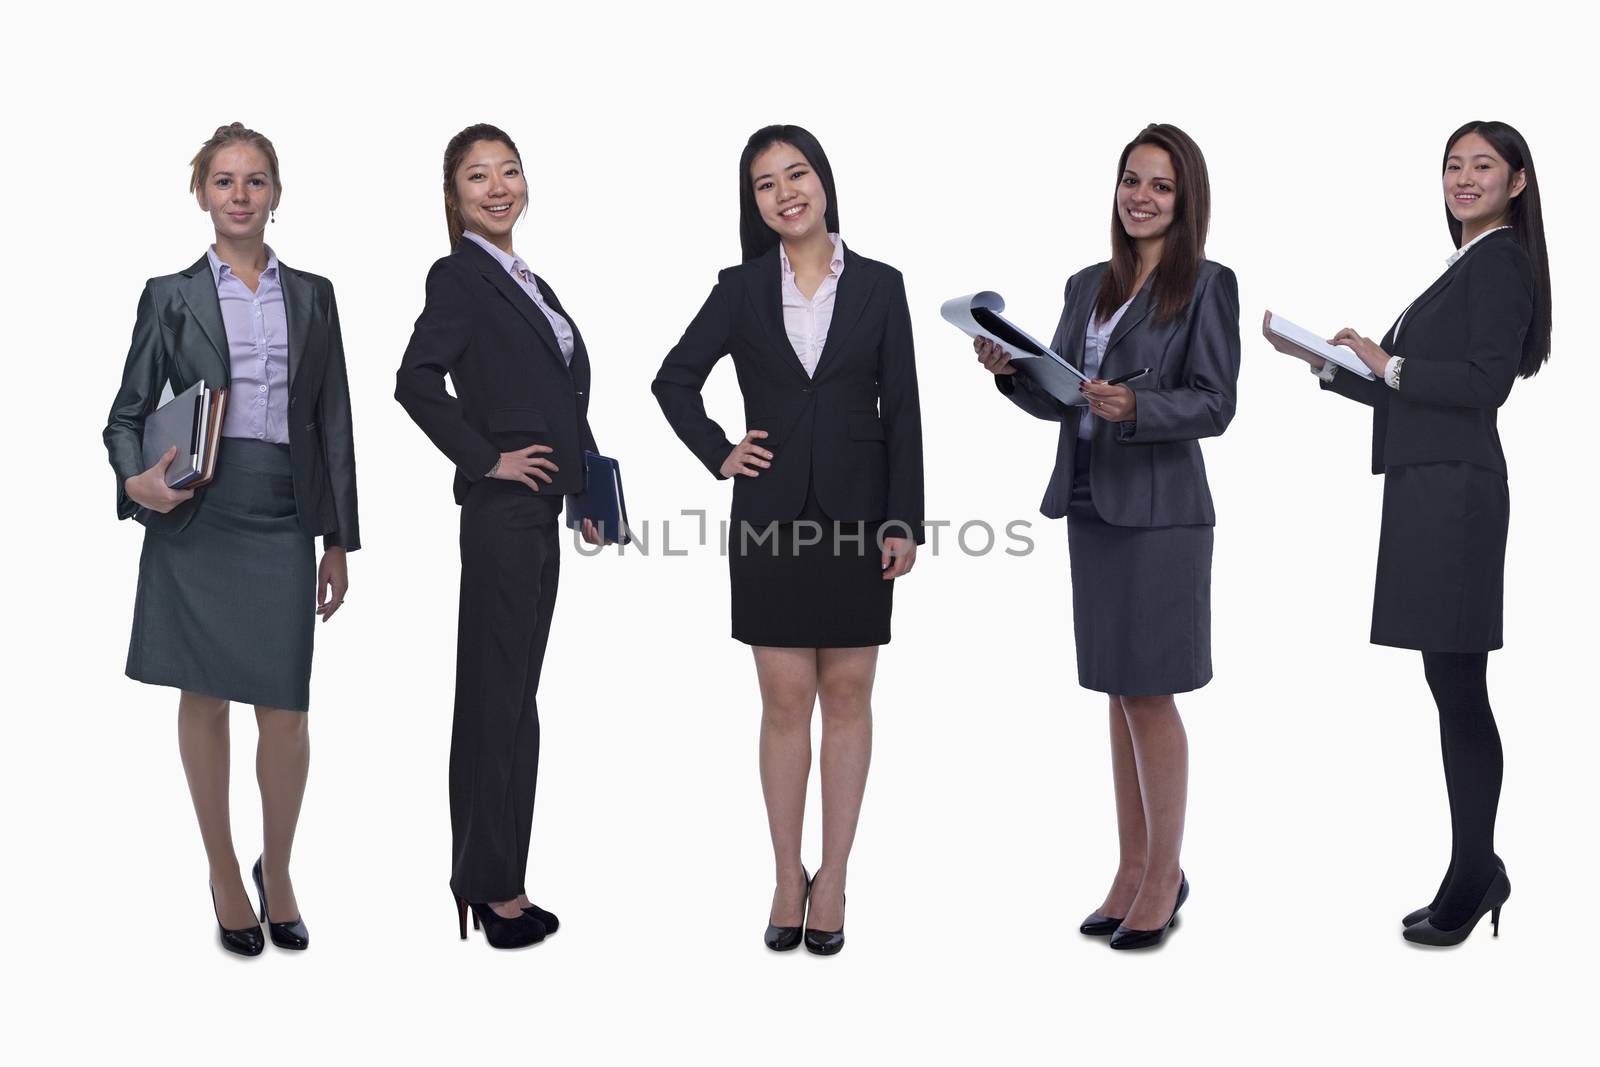 Portrait of five young smiling businesswomen, looking at camera, studio shot